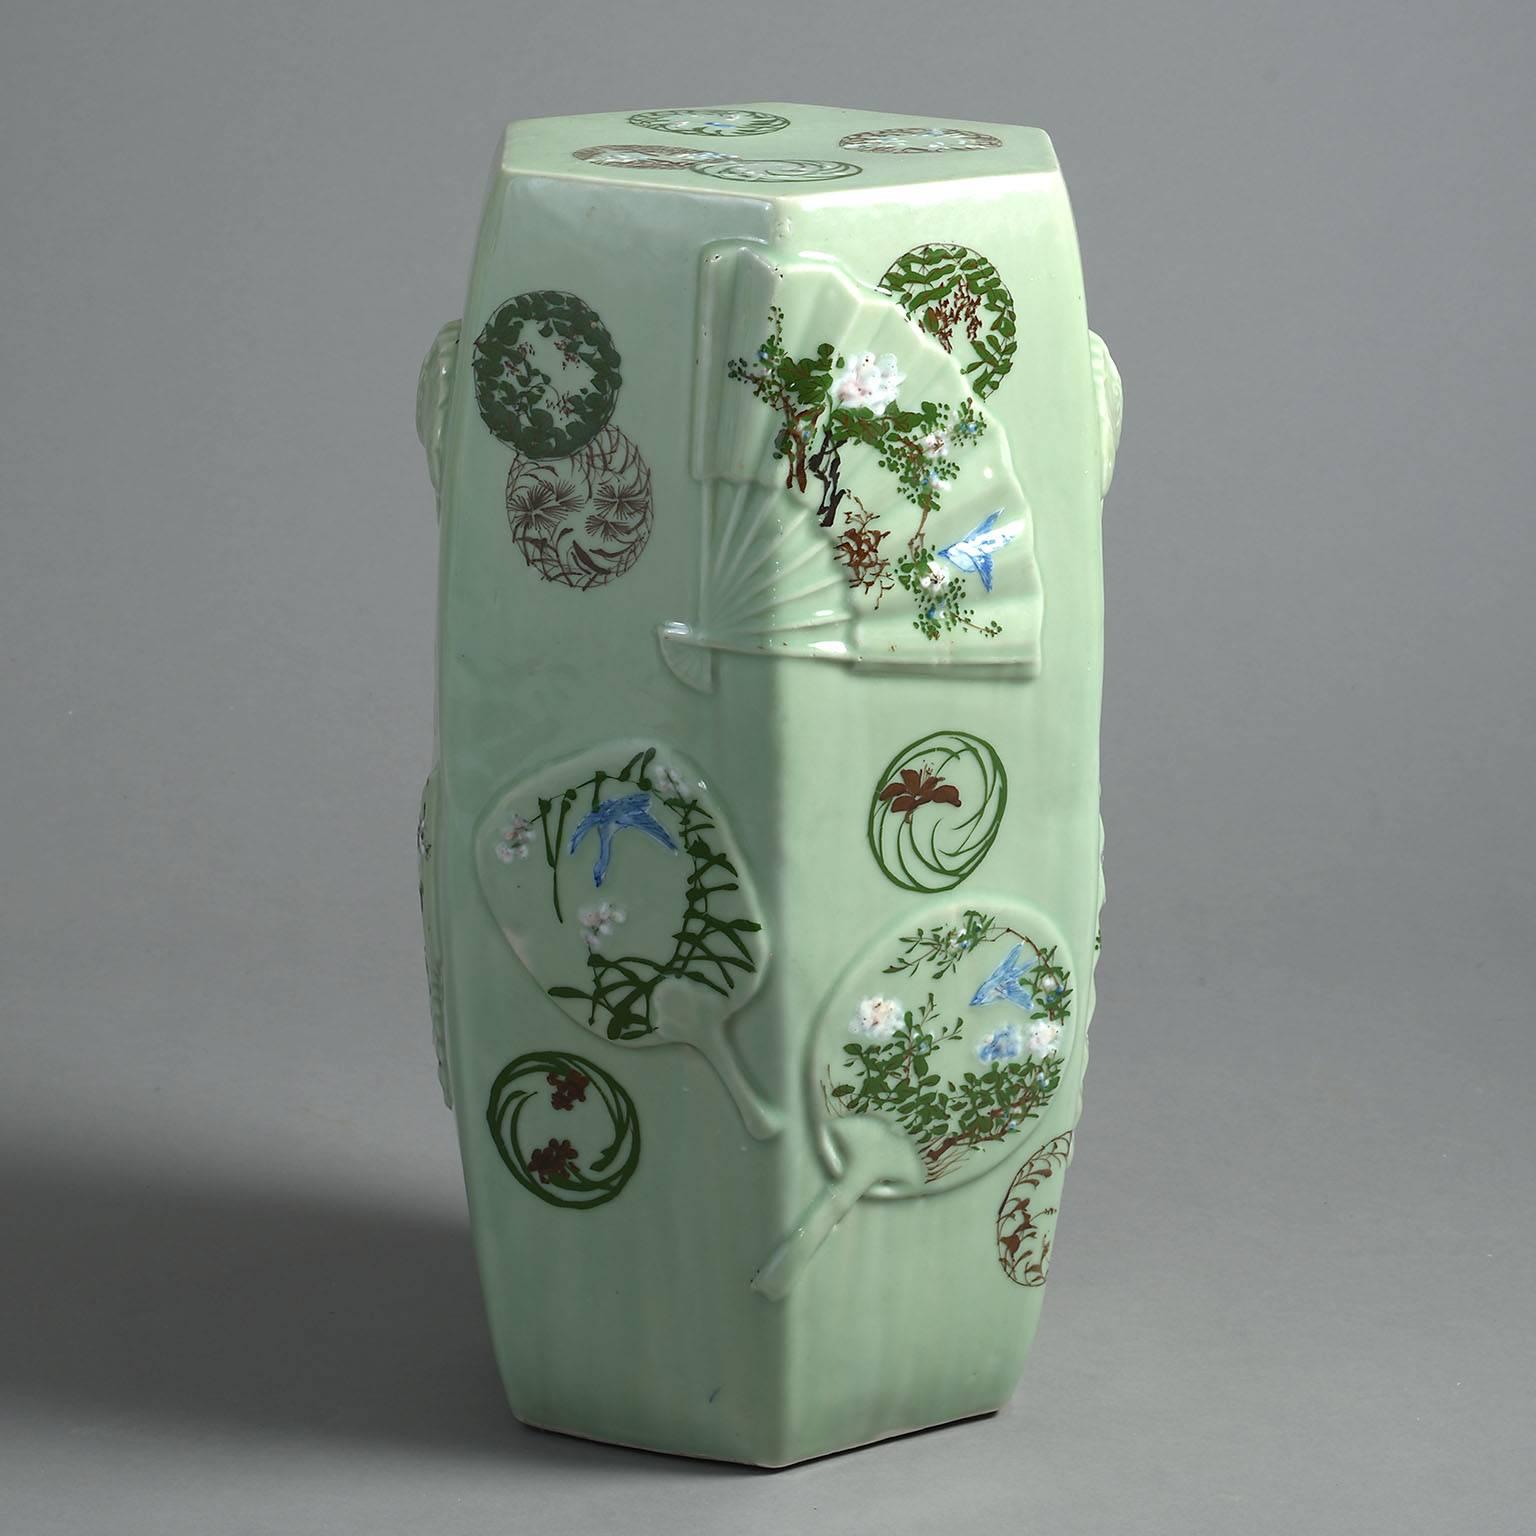 The bulbous hexagonal body moulded in relief with fans decorated with birds and cherry blossom on a celadon green glazed ground and with pierced and moulded handles to each side.

Perfect for use in the garden or as a small table next to a sofa or